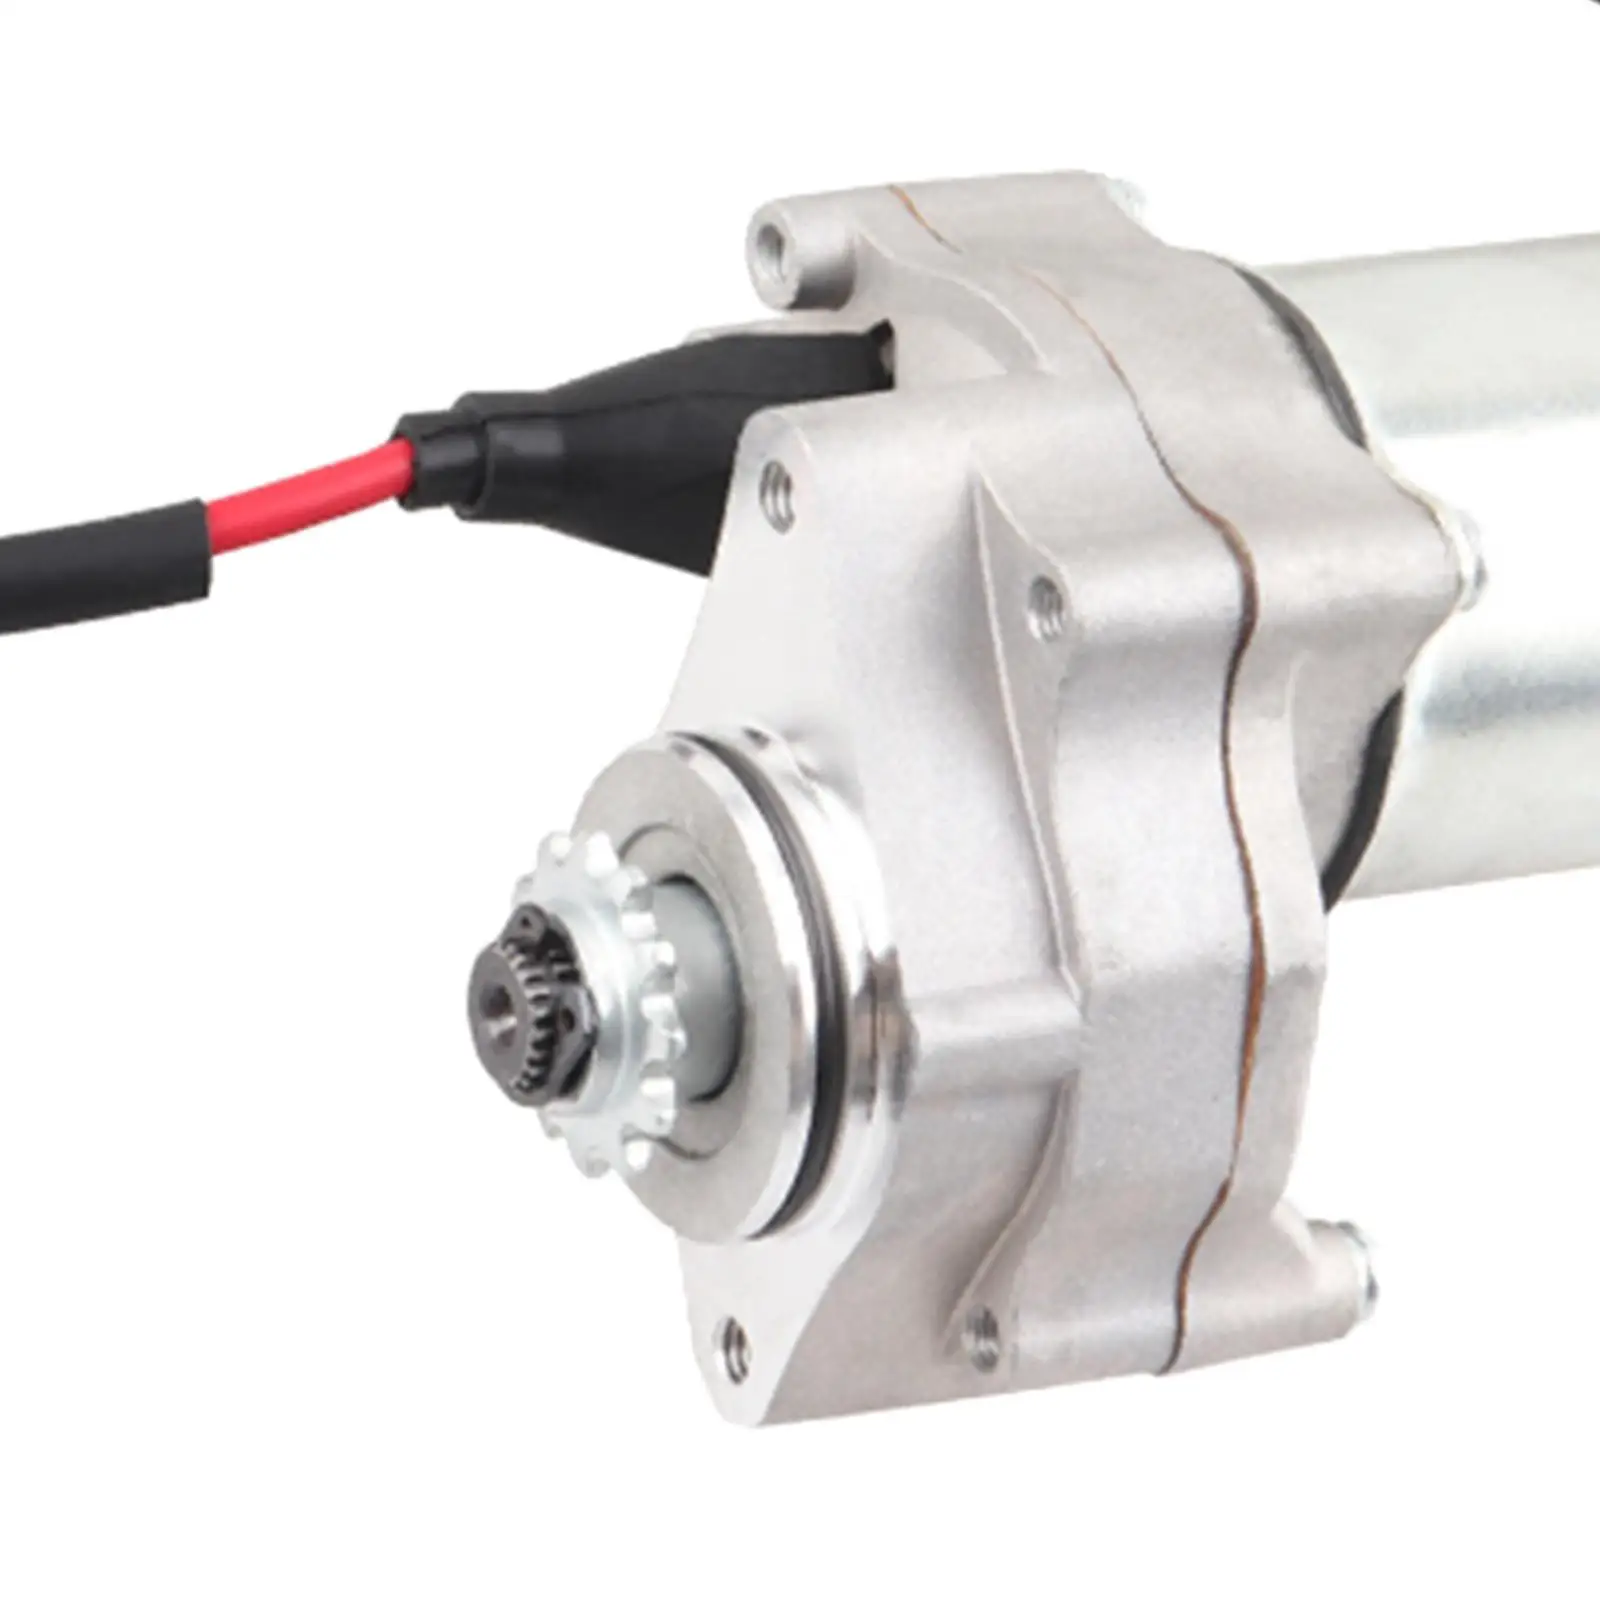 3 Bolt Starter Motor Directly Replace High Performance for 50cc 70cc 90cc 110cc